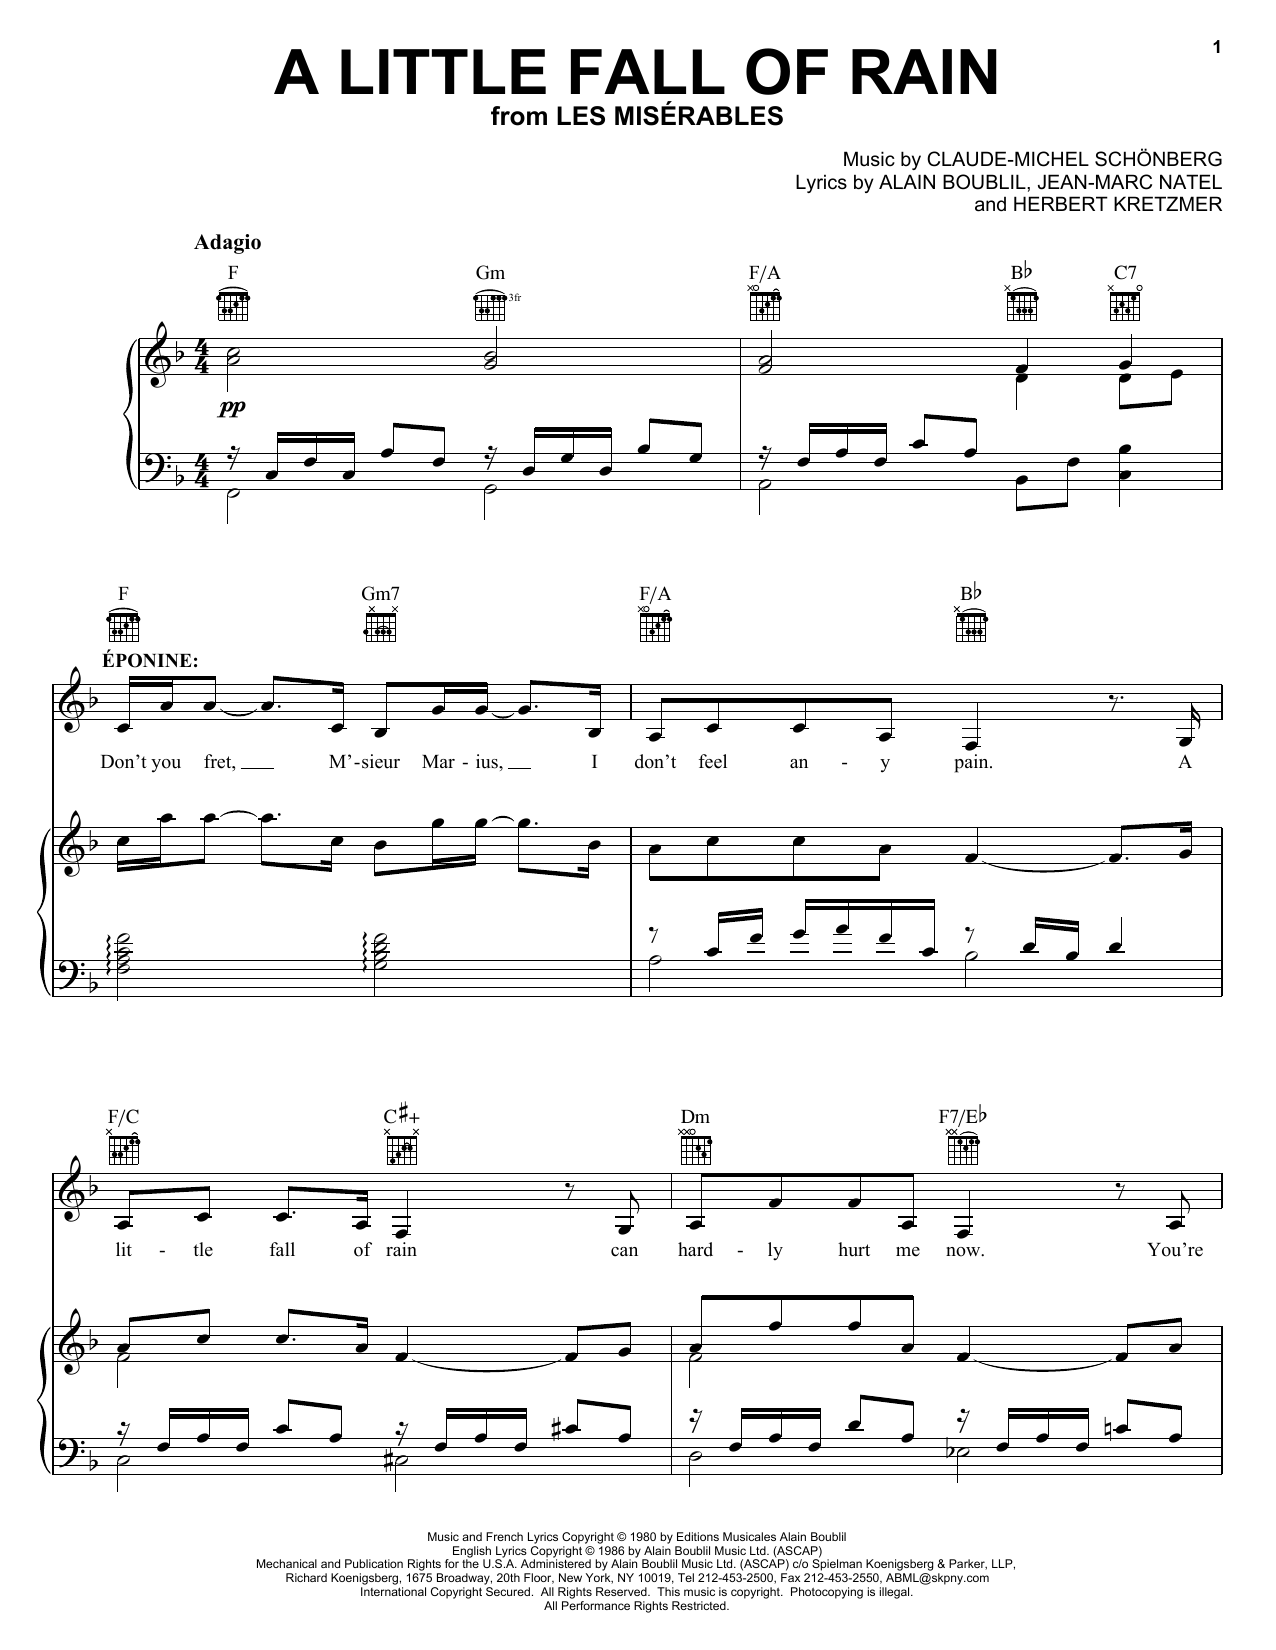 Alain Boublil A Little Fall Of Rain sheet music notes and chords. Download Printable PDF.